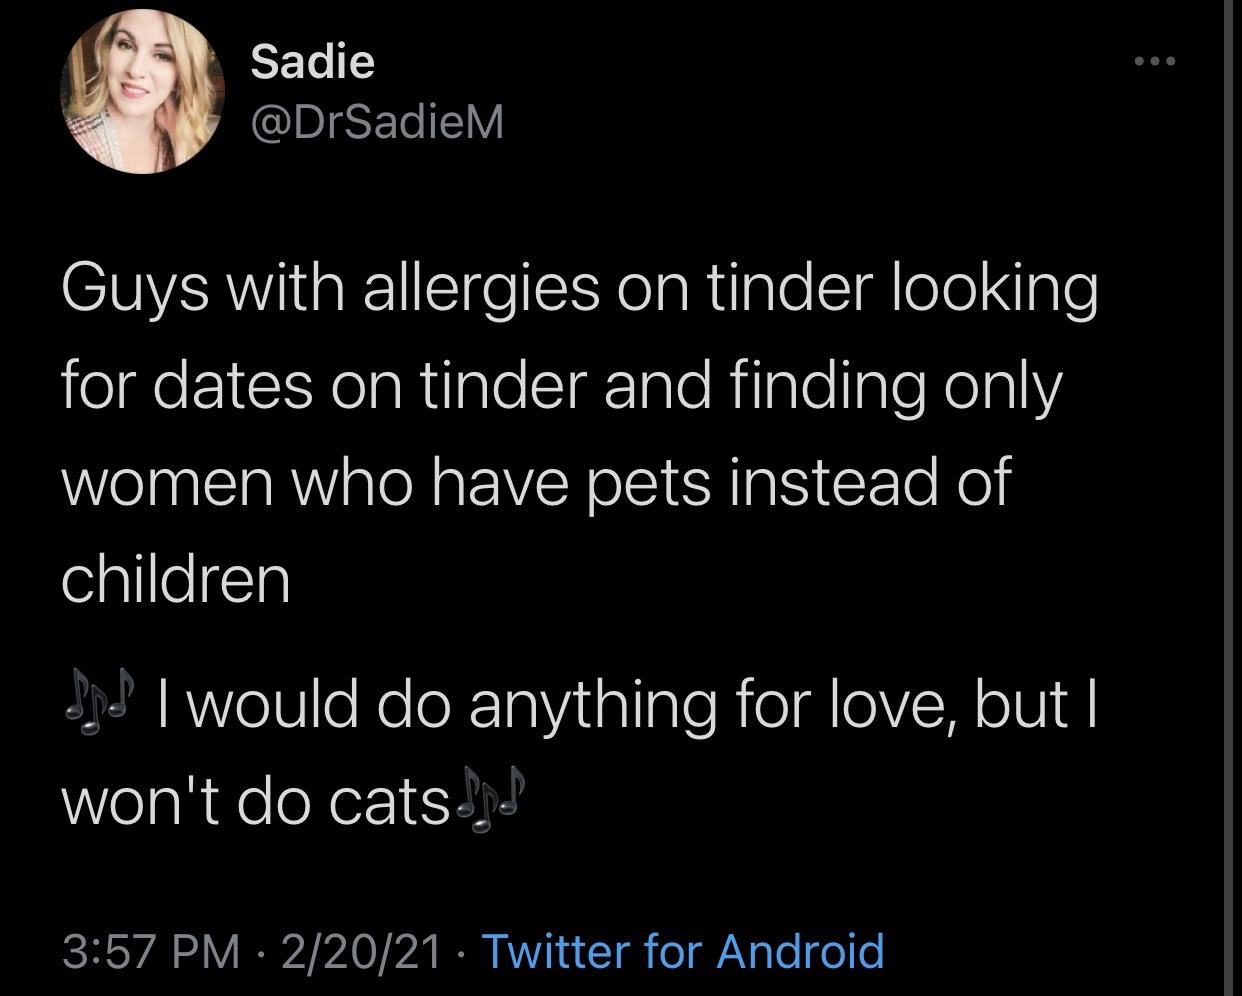 atmosphere - Sadie Guys with allergies on tinder looking for dates on tinder and finding only women who have pets instead of children I would do anything for love, but | won't do cats.nl 22021 Twitter for Android